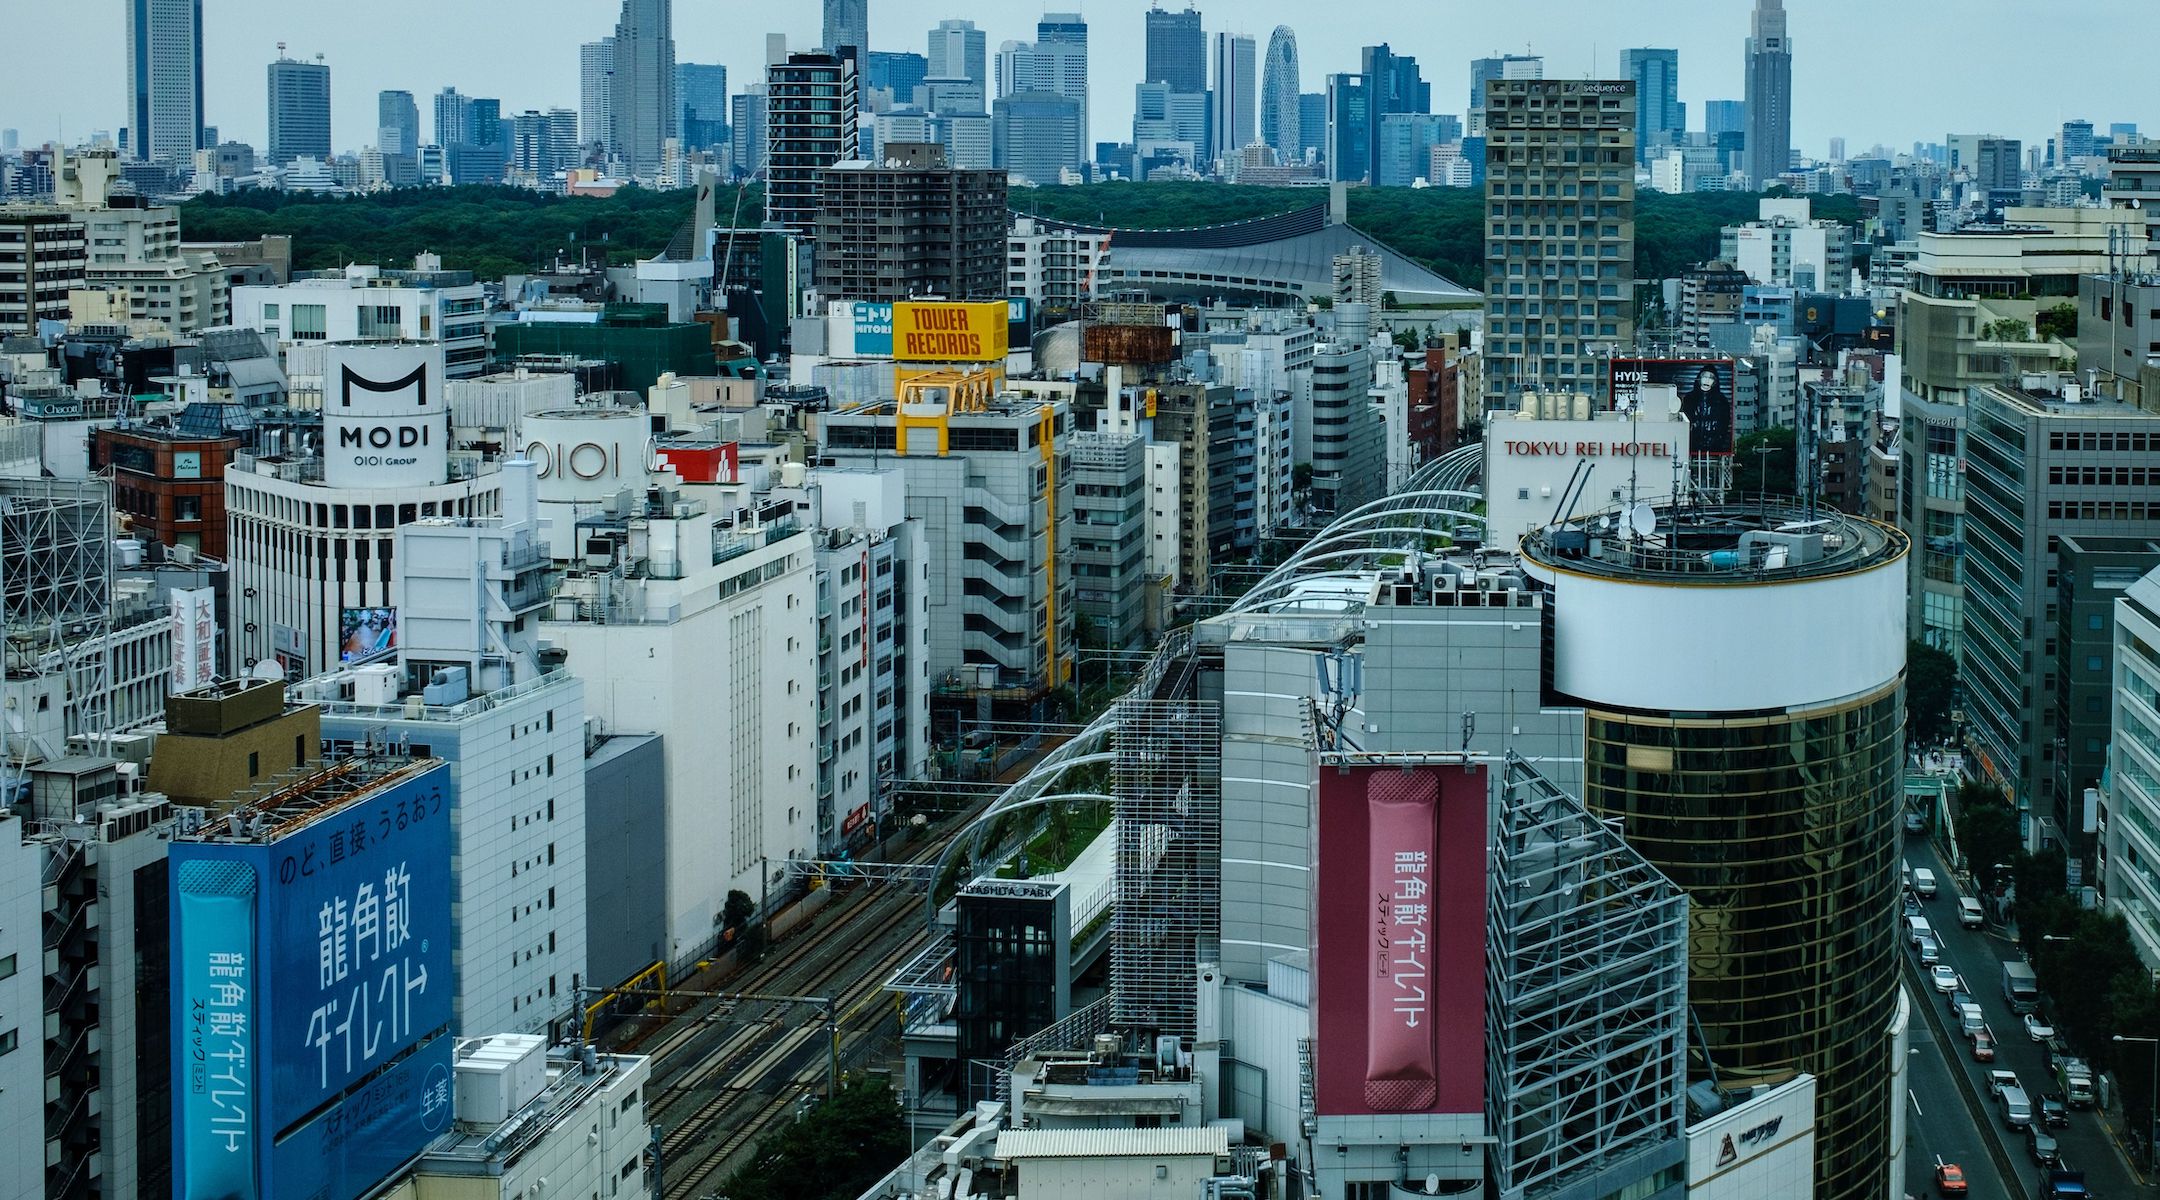 A view of Tokyo’s Shibuya district on July 16, 2020. Freeman Shokudo is located in Hitagaya, a neighborhood in Shibuya. (Philip Fong/AFP via Getty Images)